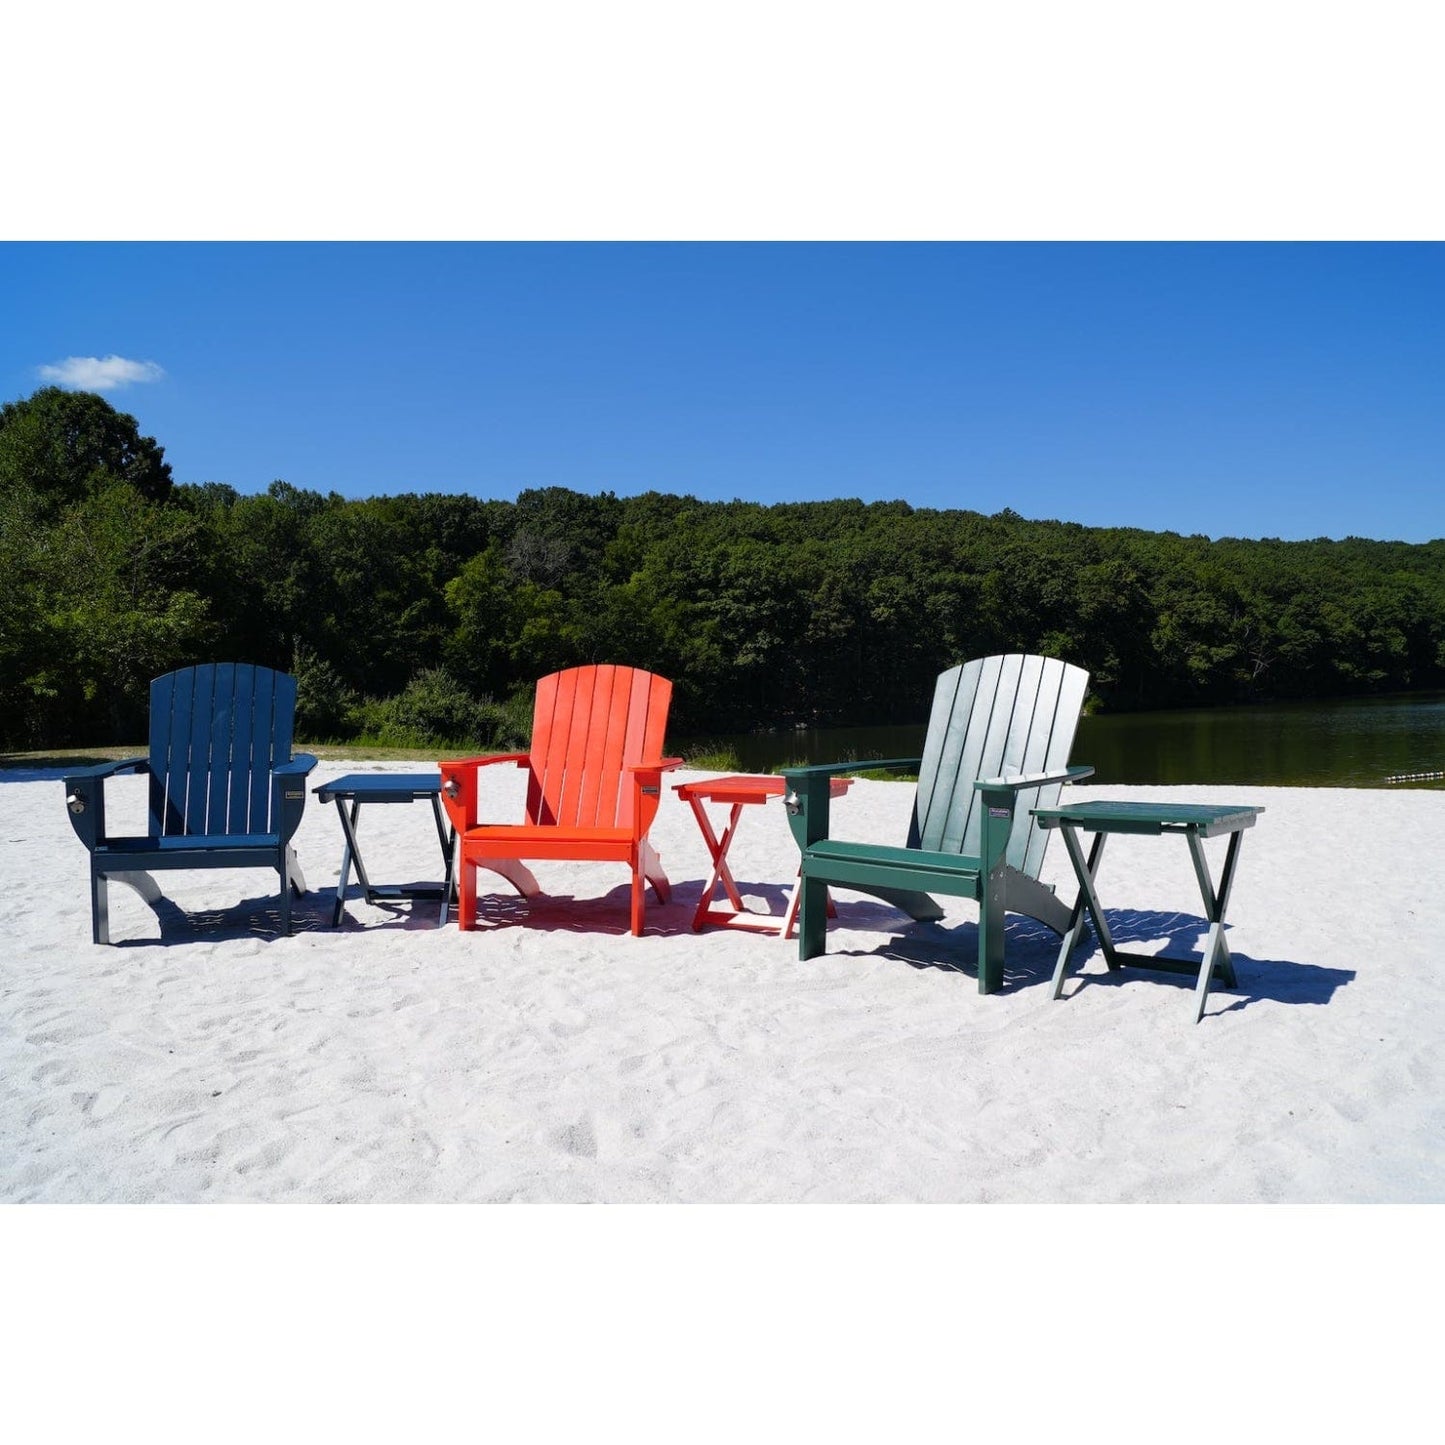 Riverstone Industries Outdoor Chairs Riverstone | Adirondack Chair with Side Table - Red Wood RSI-AC-RW-T